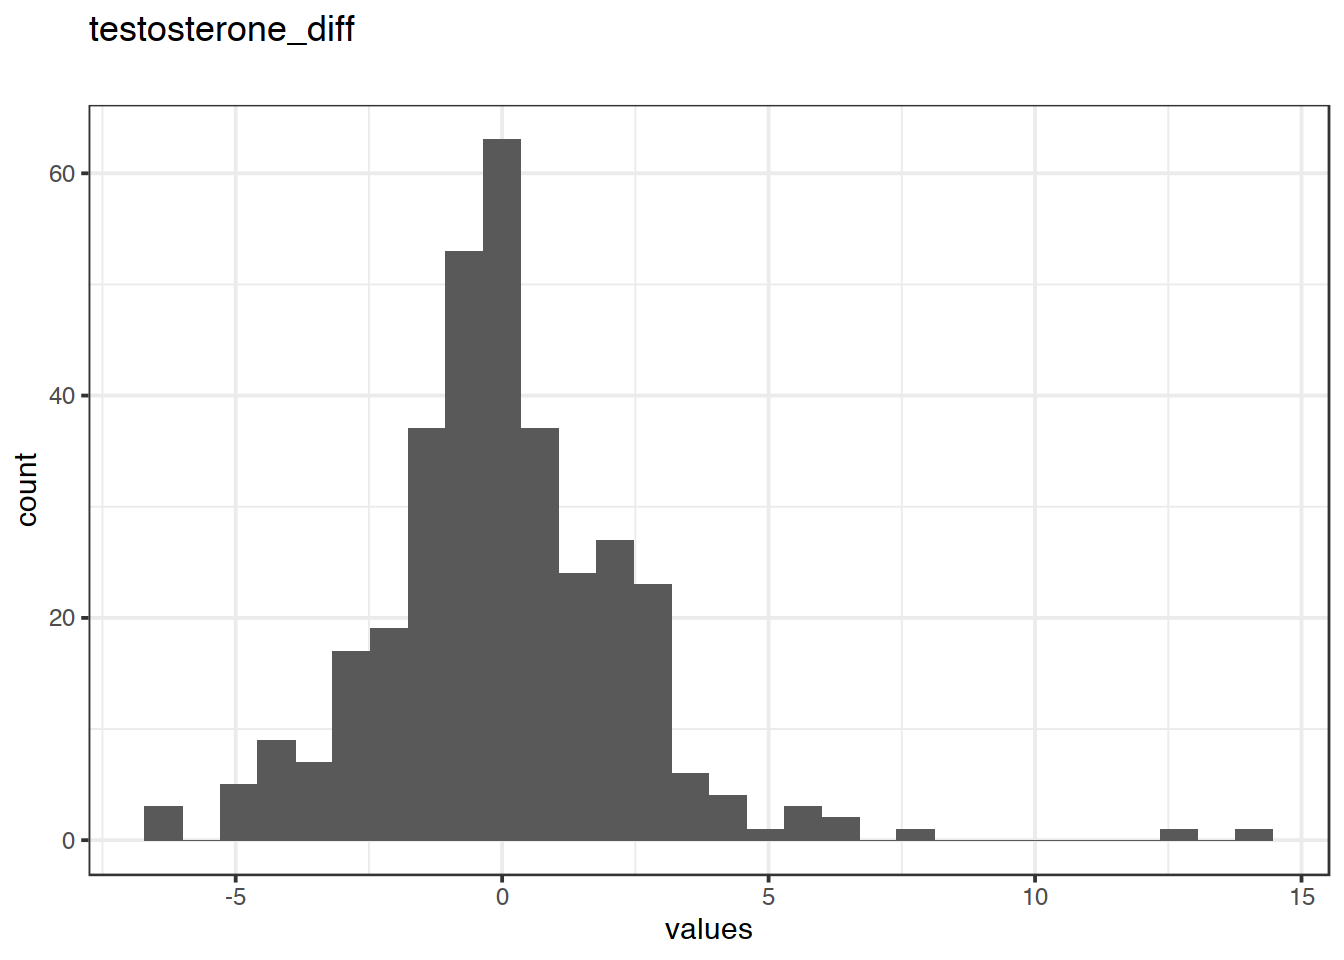 Distribution of values for testosterone_diff